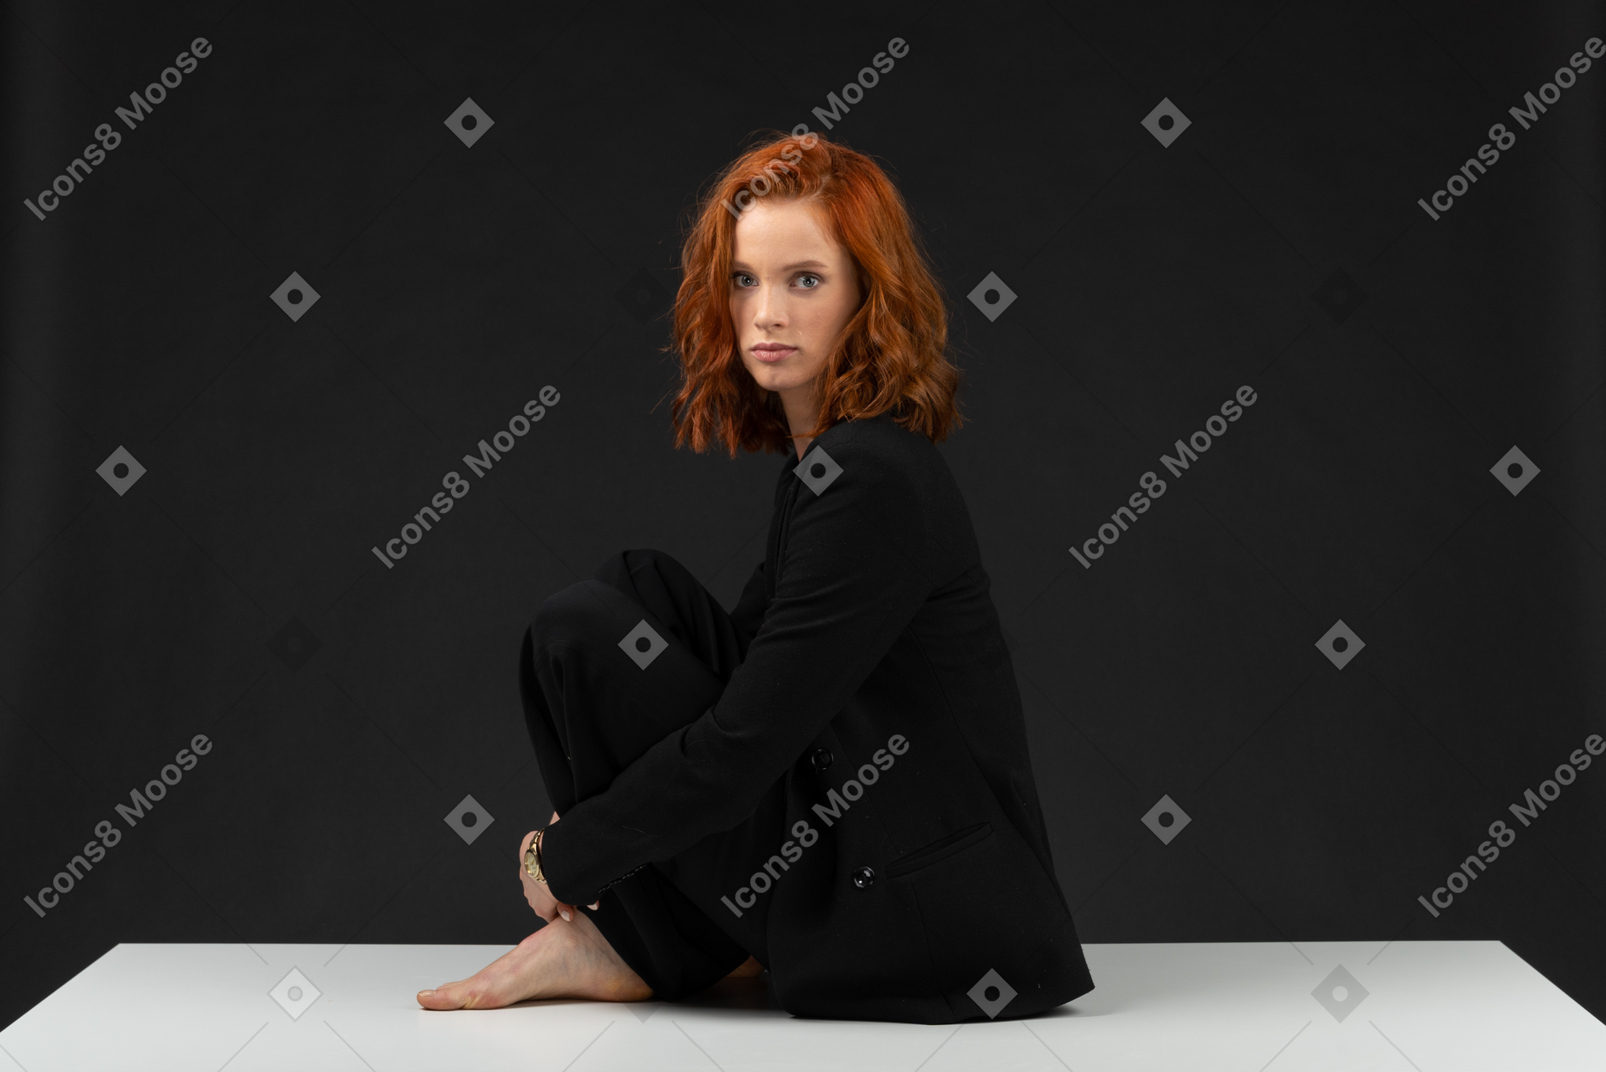 Cute formally dressed girl sitting on the table and looking at the camera